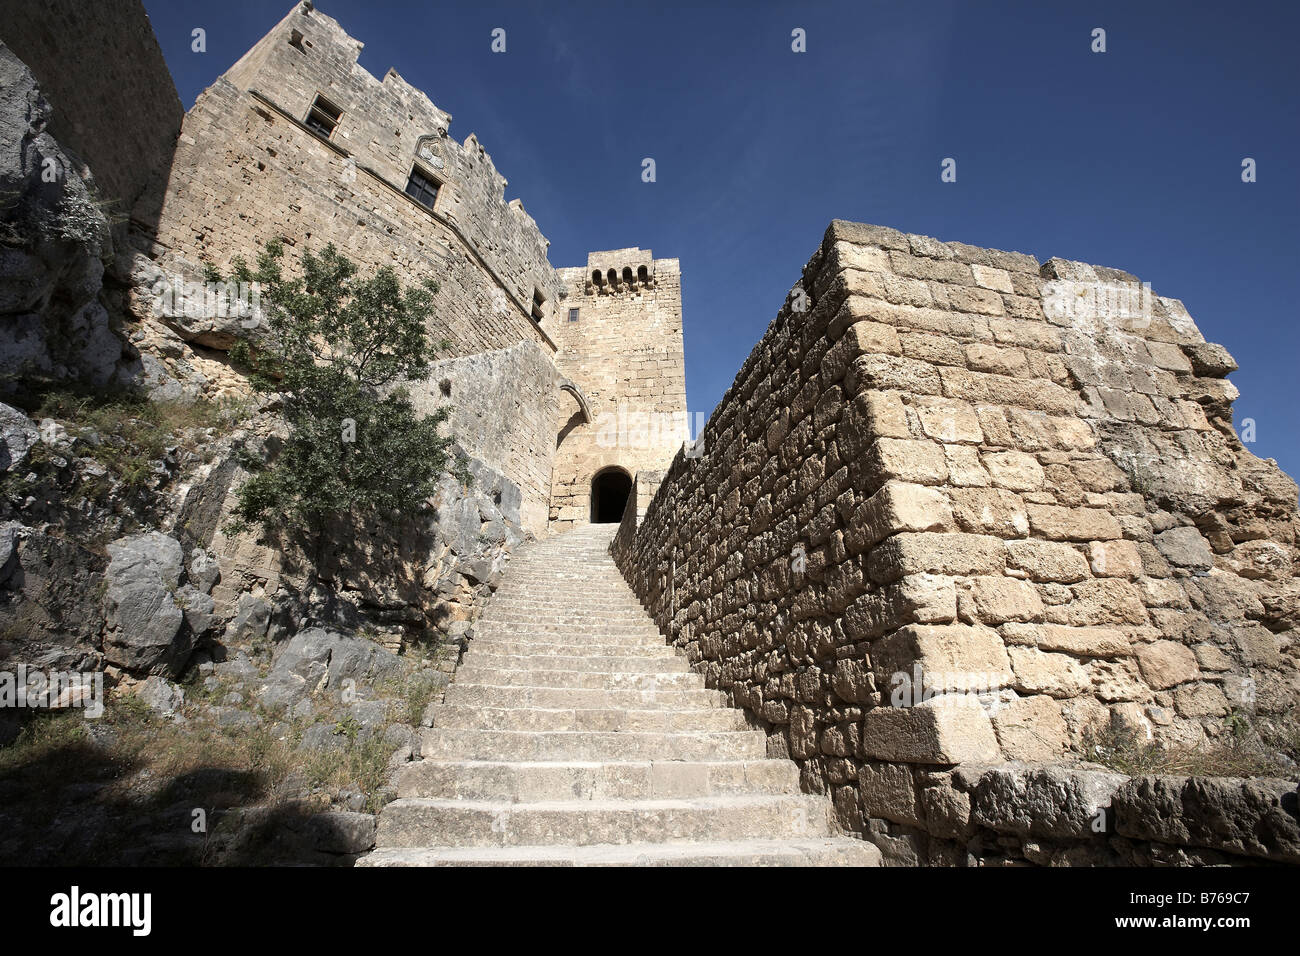 Steps up to the fort within the Acropolis Lindos Island of Rhodes Dodekanes Greece Stock Photo